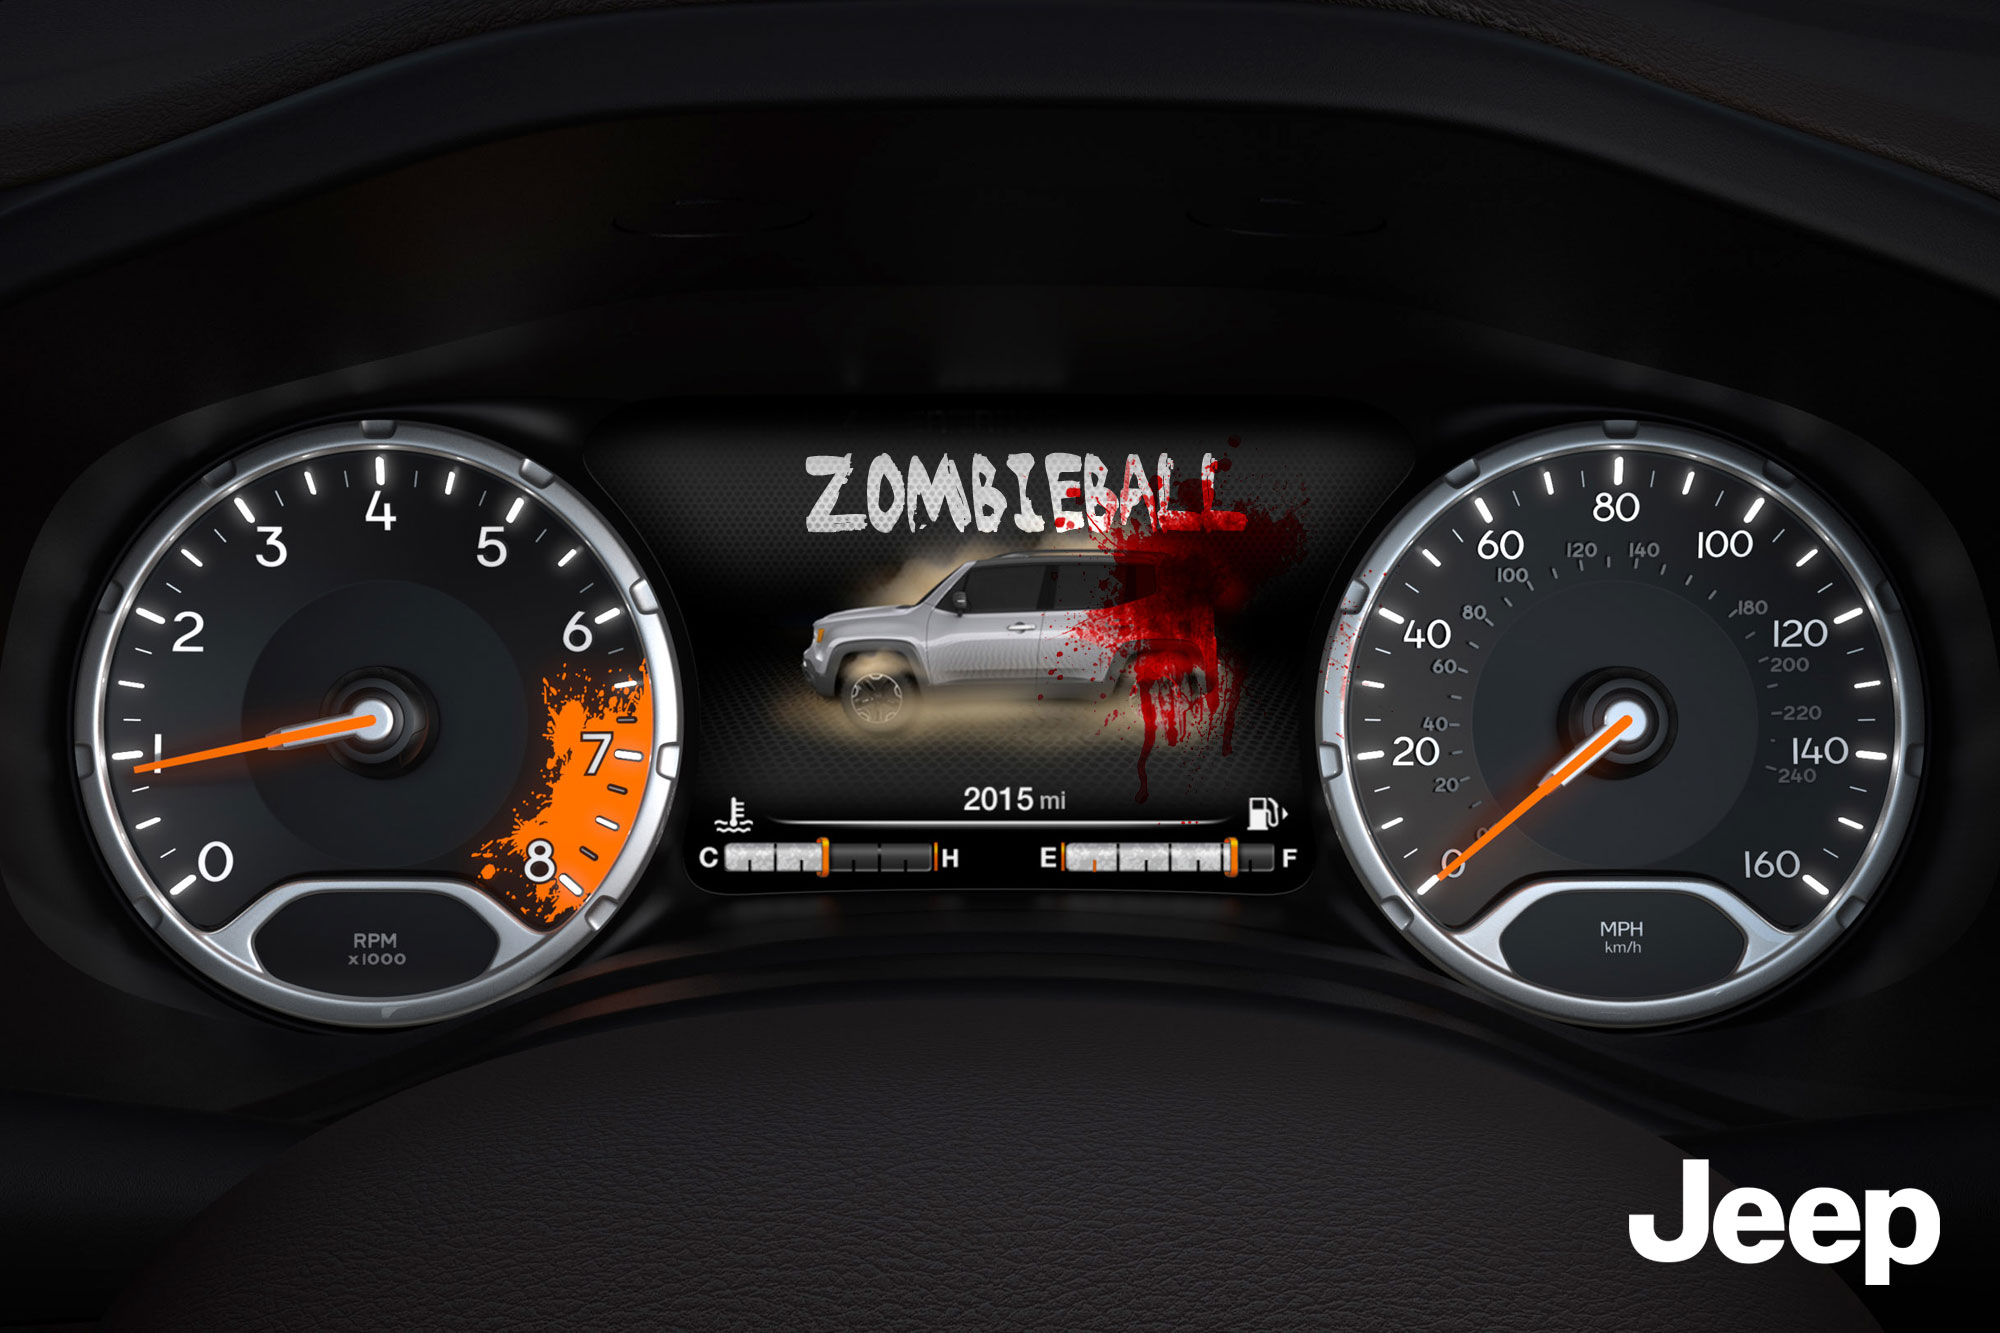 Zombies Are Taking Over El Gouna, and You're Cordially Invited to Their Zombieball